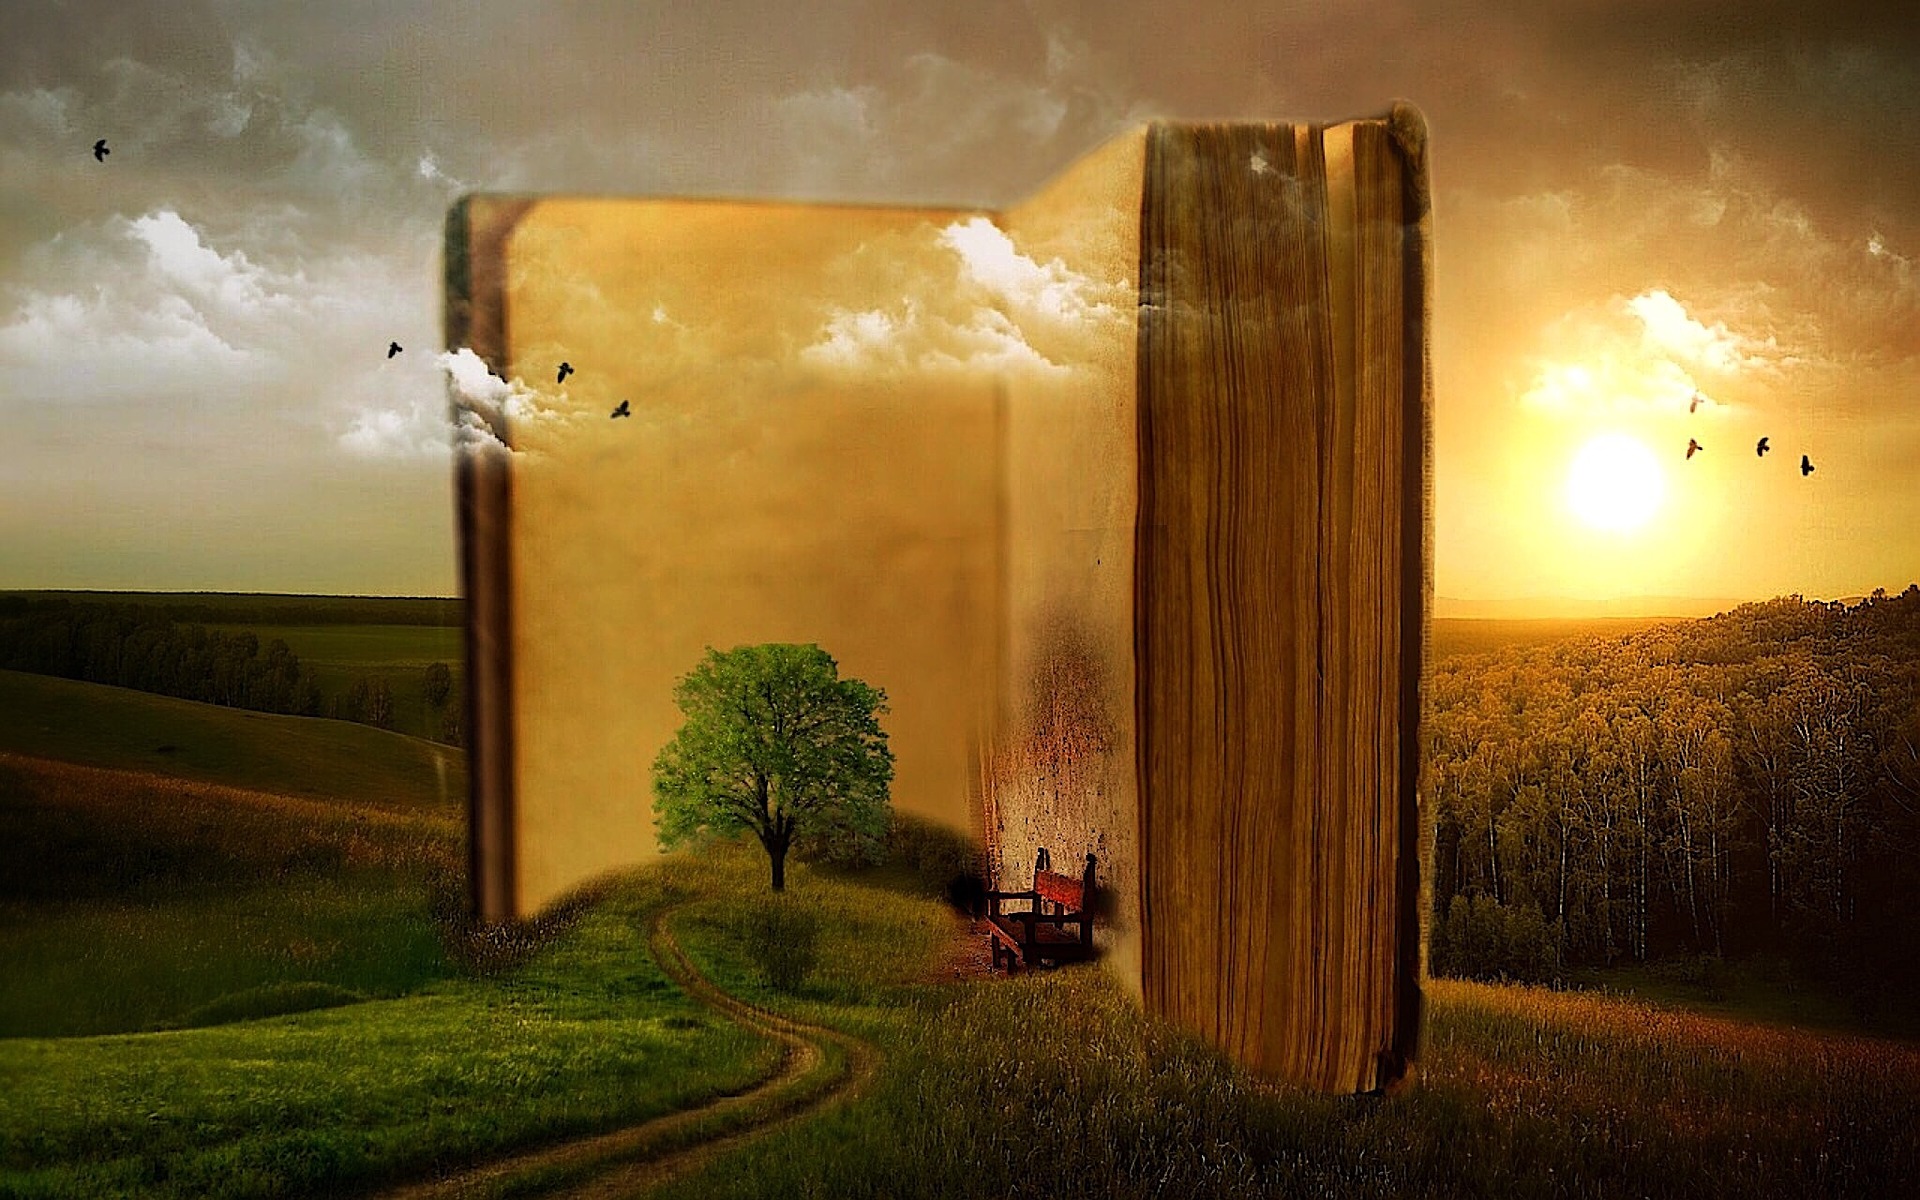 Field at sunset, with a giant book shielding a storytelling chair Mysticsartdesign (CC0) https://pixabay.com/en/book-old-clouds-tree-birds-bank-863418/